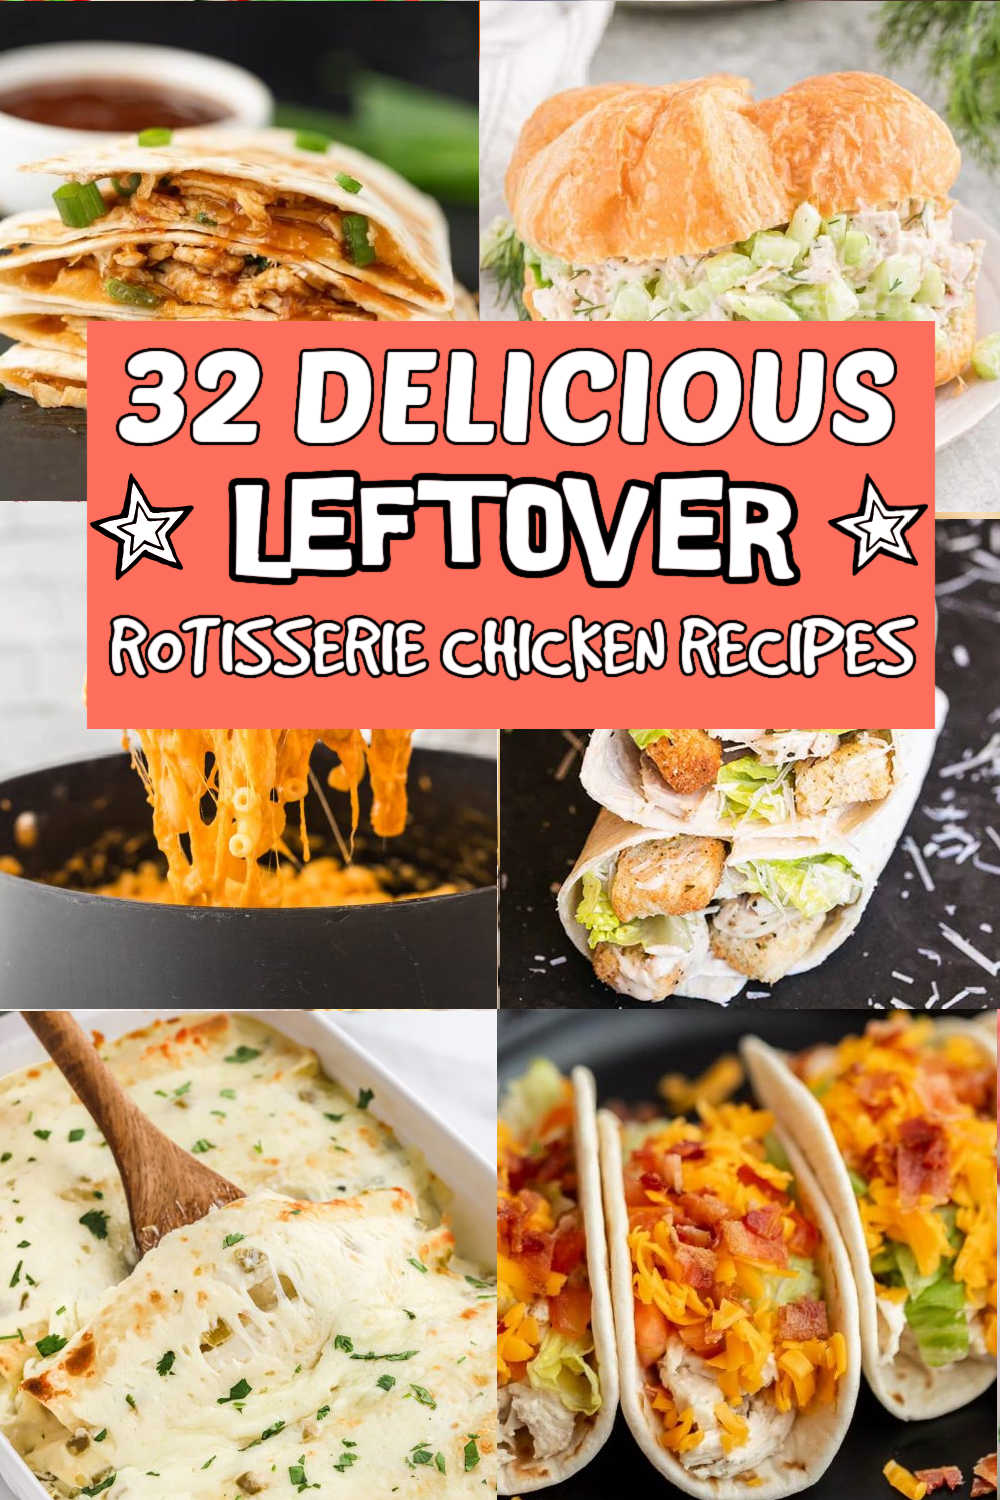 If you have Leftover Rotisserie Chicken use it to make one of these easy and delicious recipes. Turn your rotisserie chicken into a new meal. These easy leftover rotisserie chicken recipes are quick and easy. I can get dinner on the table fast since we are so busy during the week. Simple ingredients that are delicious and always a crowd favorite. #eatingonadime #leftoverrotisseriechickenrecipe #rotisseriechickenrecipes